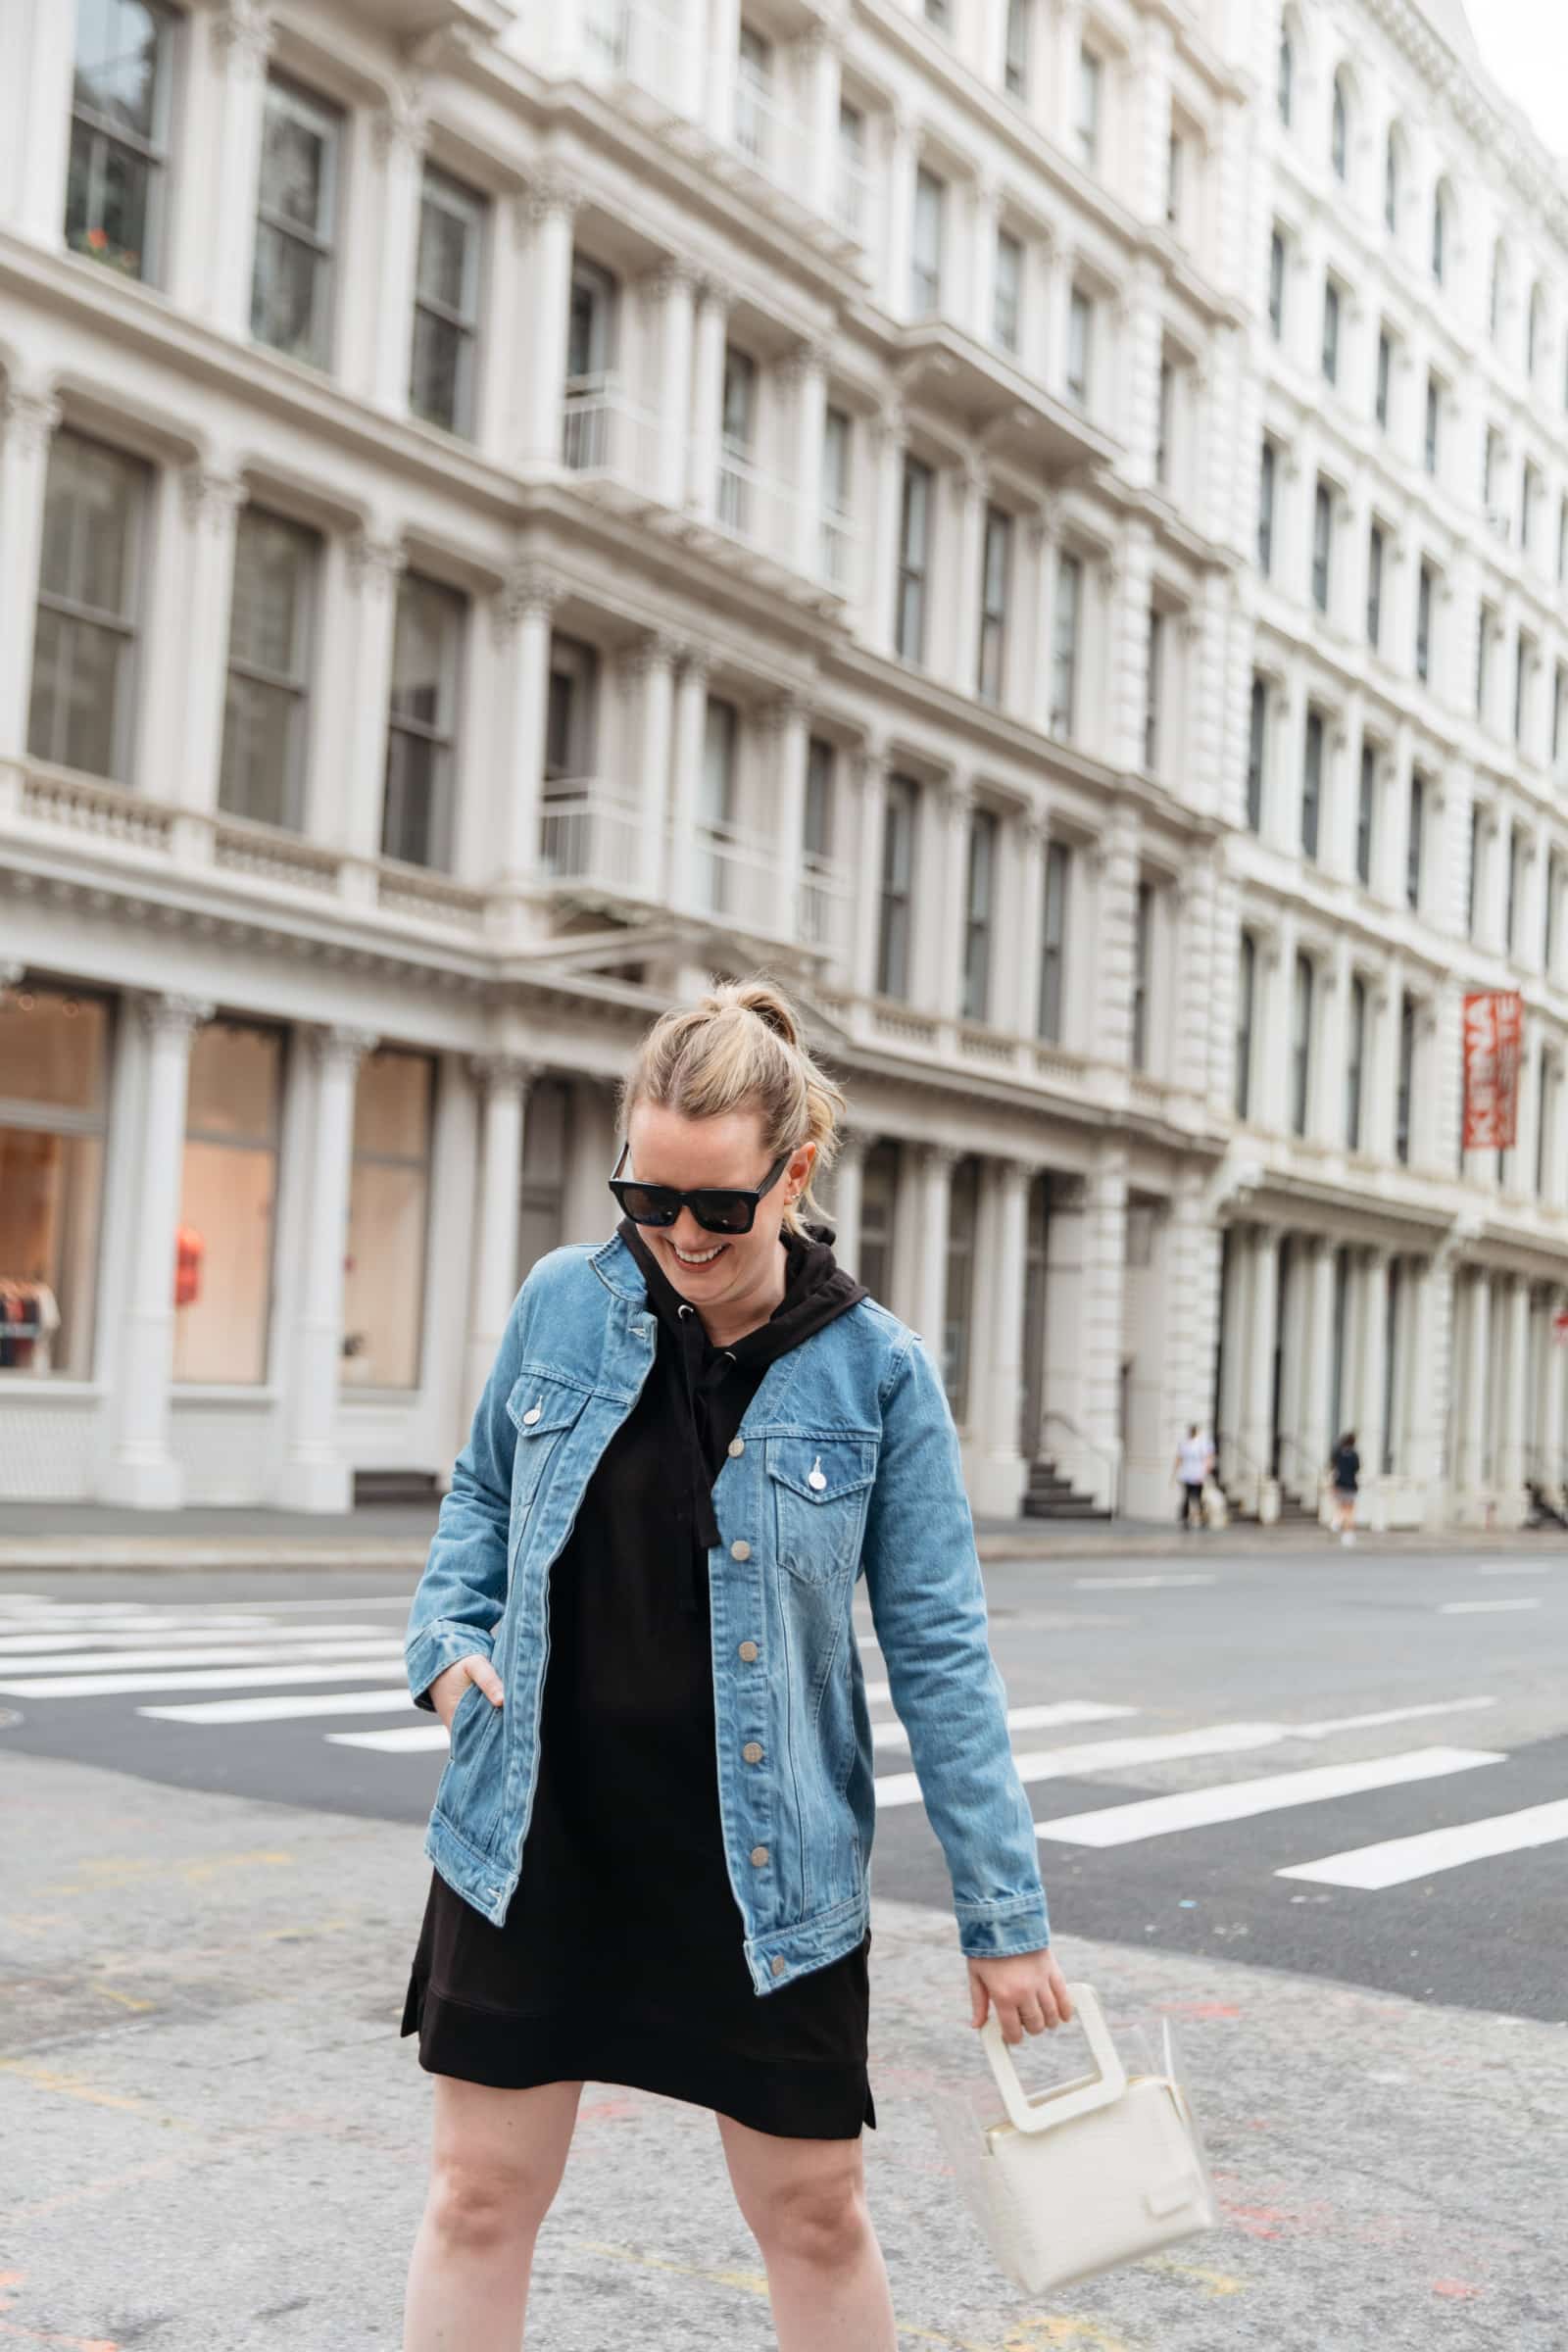 Sweatshirt Dress and Denim Jacket | Things in My Closet I Can't Wait to Wear This Fall